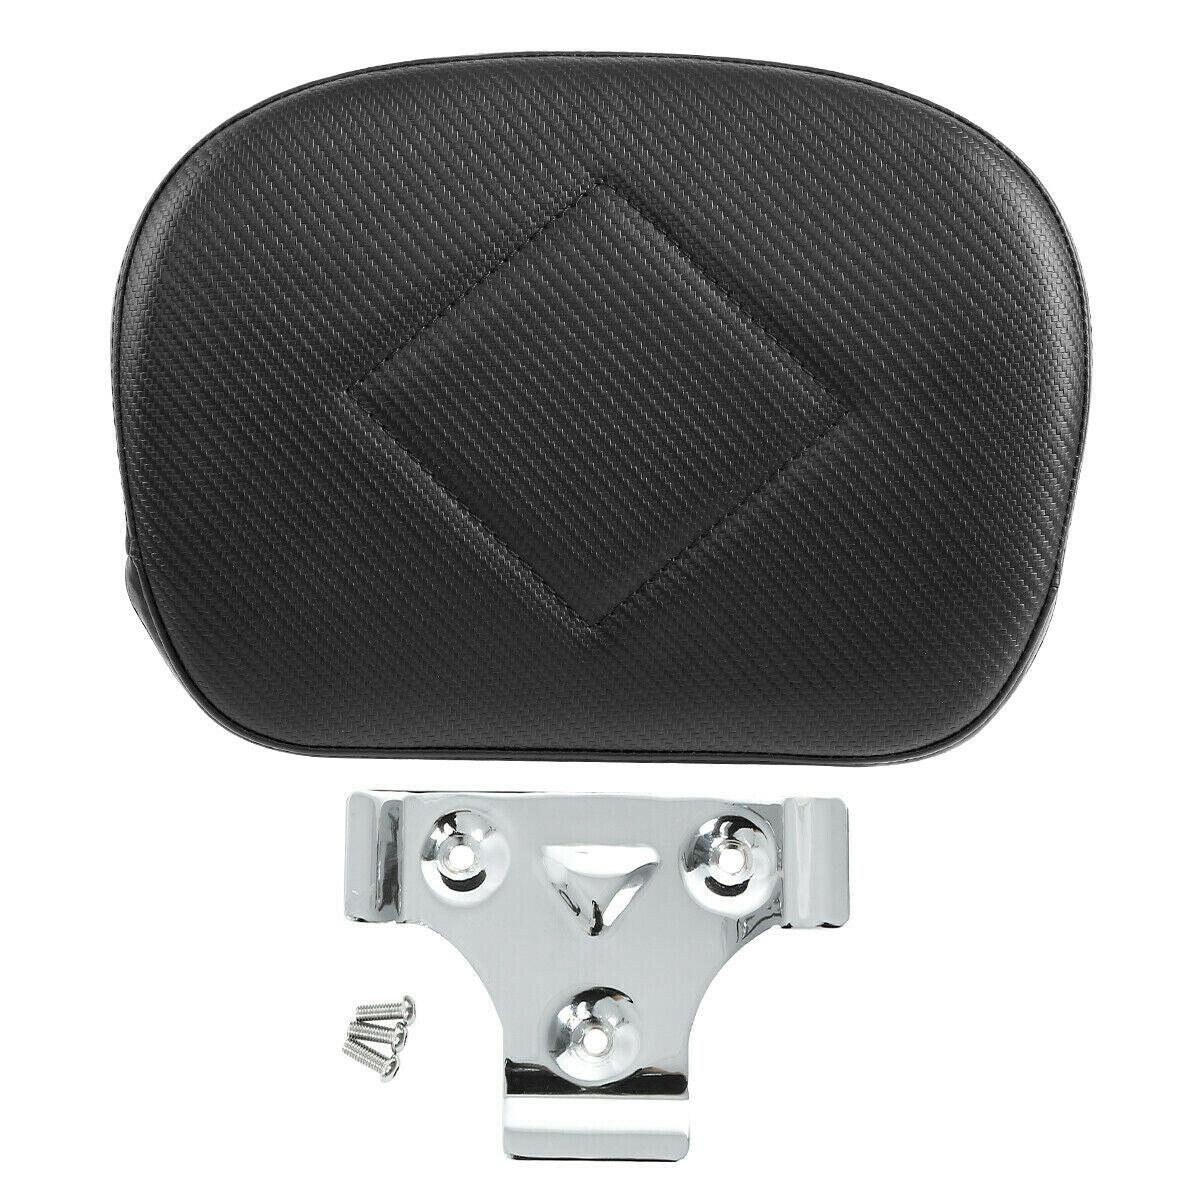 Black Rear Passenger Pad Backrest Fit For Harley Touring Street Glide Road King - Moto Life Products